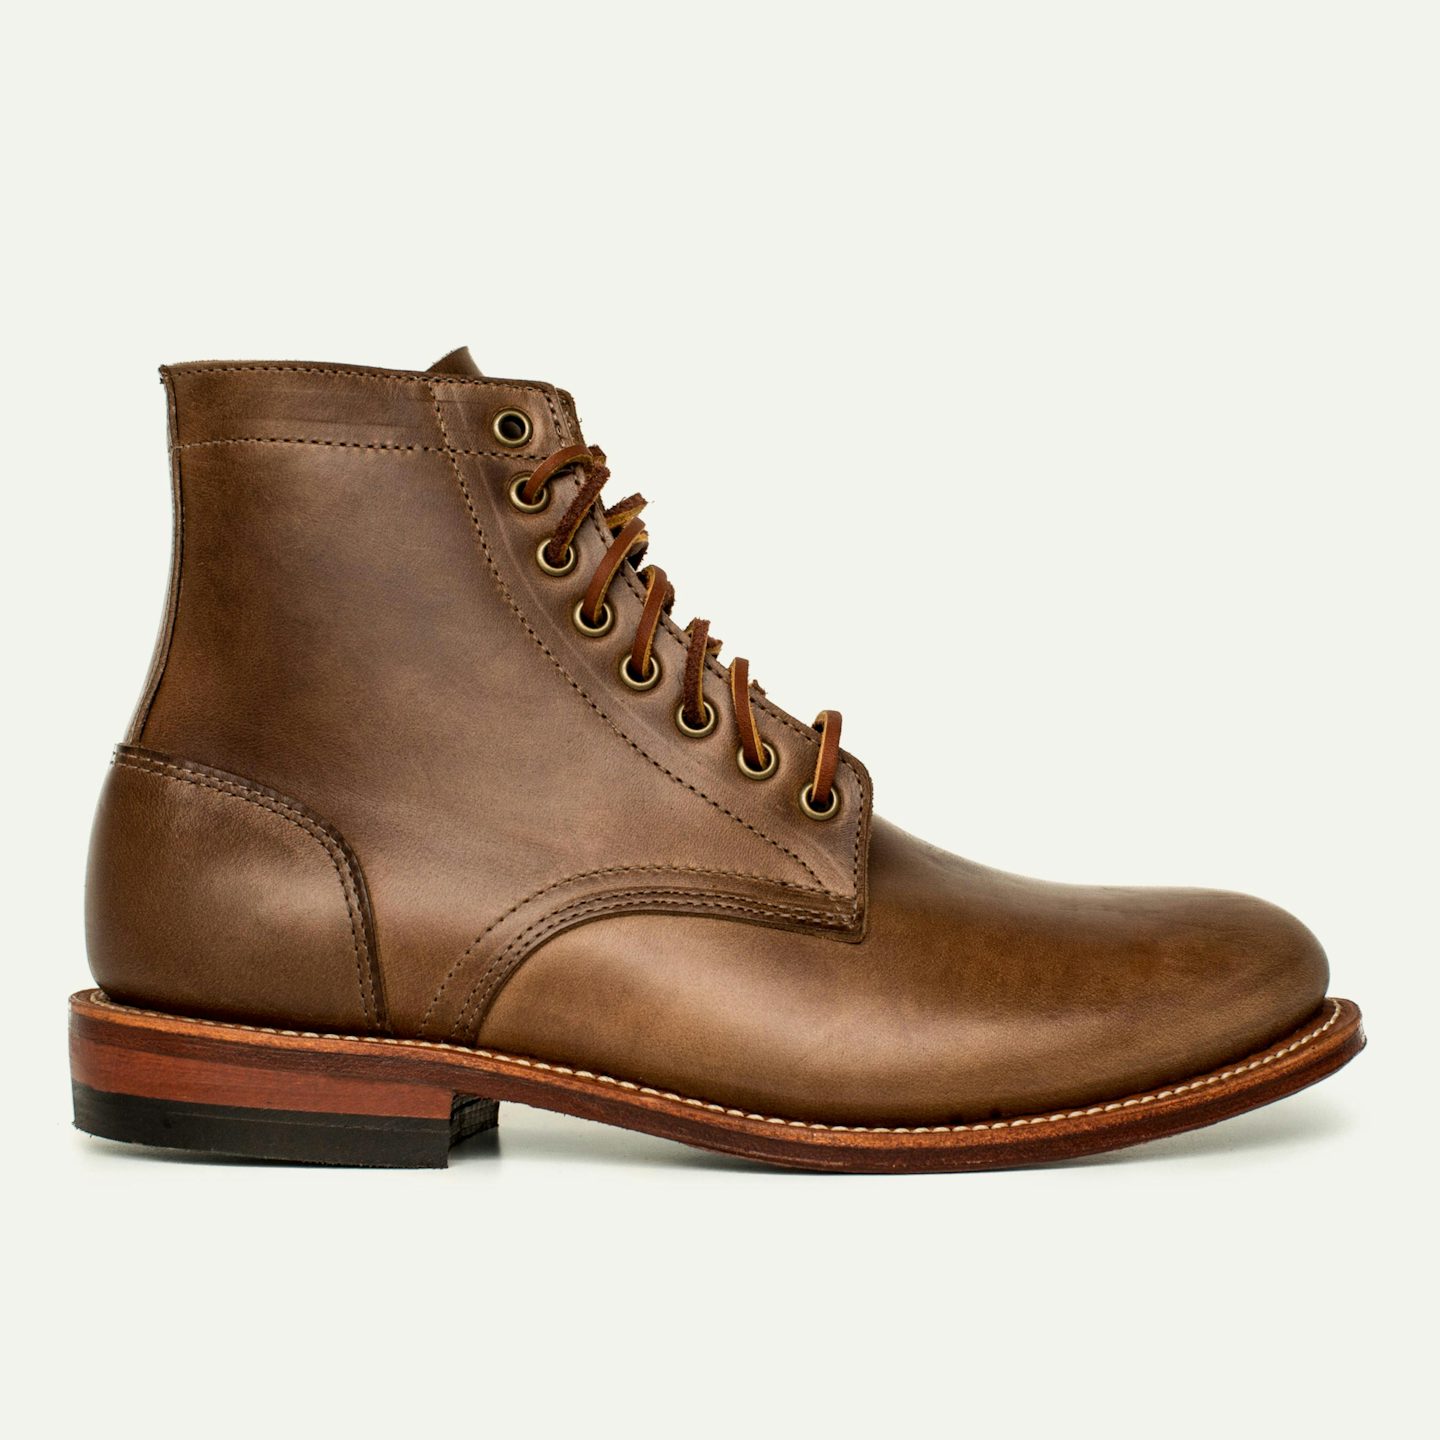 OAK STREET BOOT MAKERS  Trench Bootパラプーツ